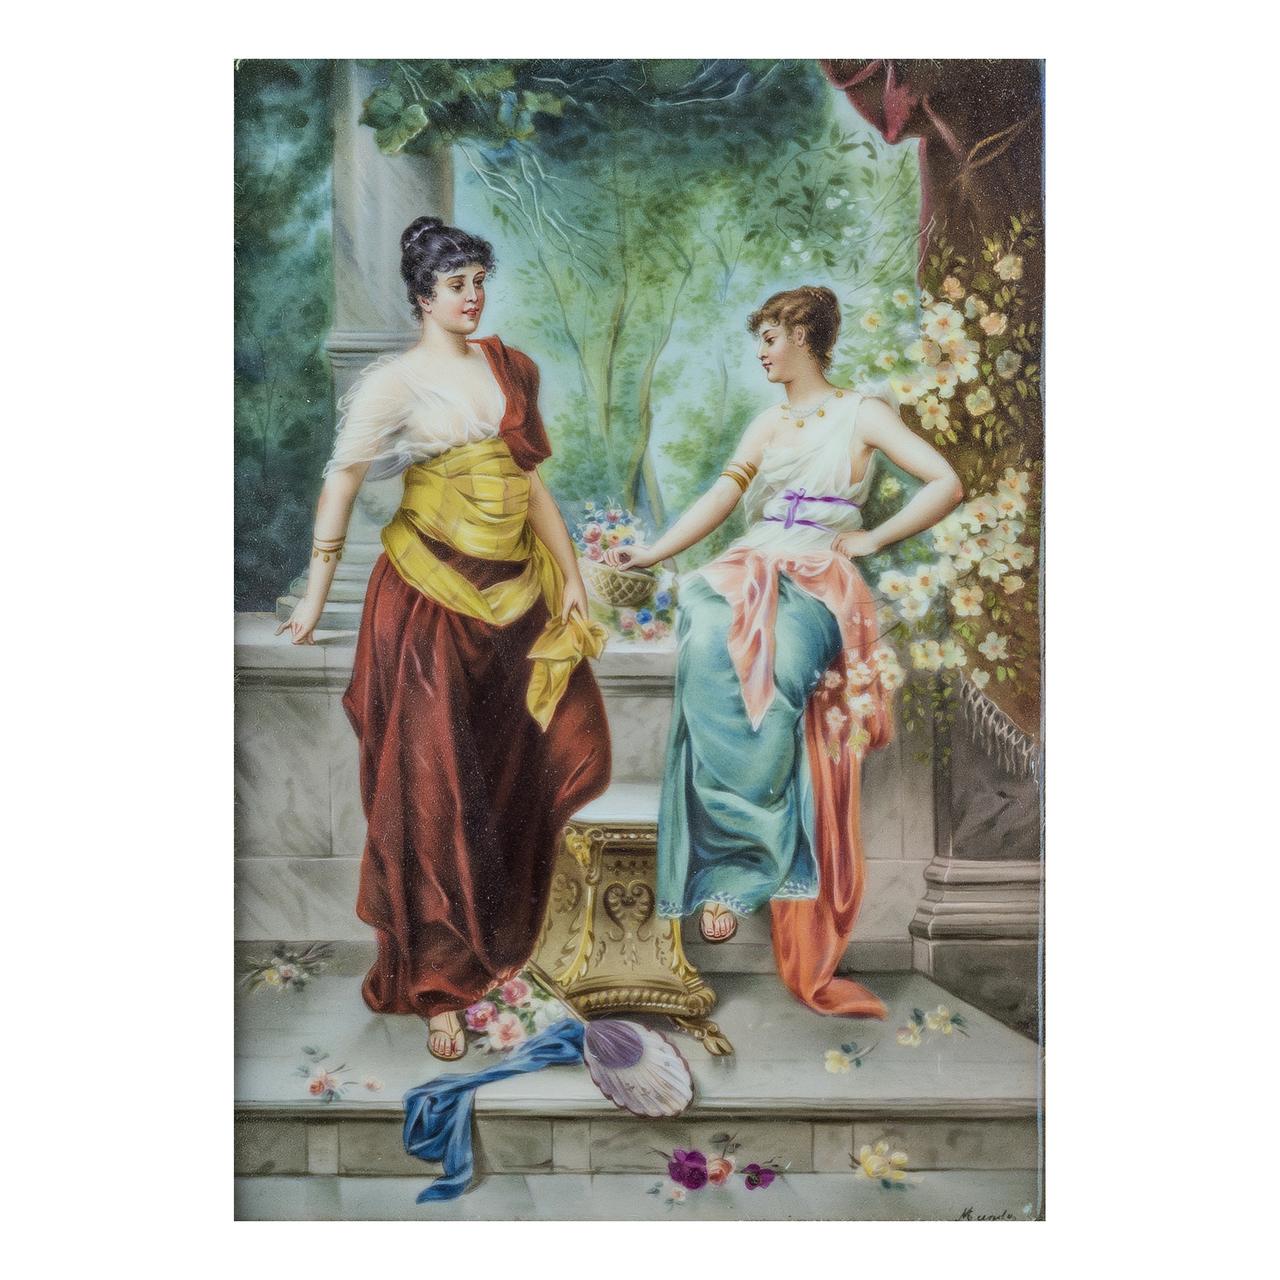  K.P.M. Porcelain of Two Beauties in Classical Dress in the Courtyard  - Painting by Königliche Porzellan-Manufaktur (KPM)